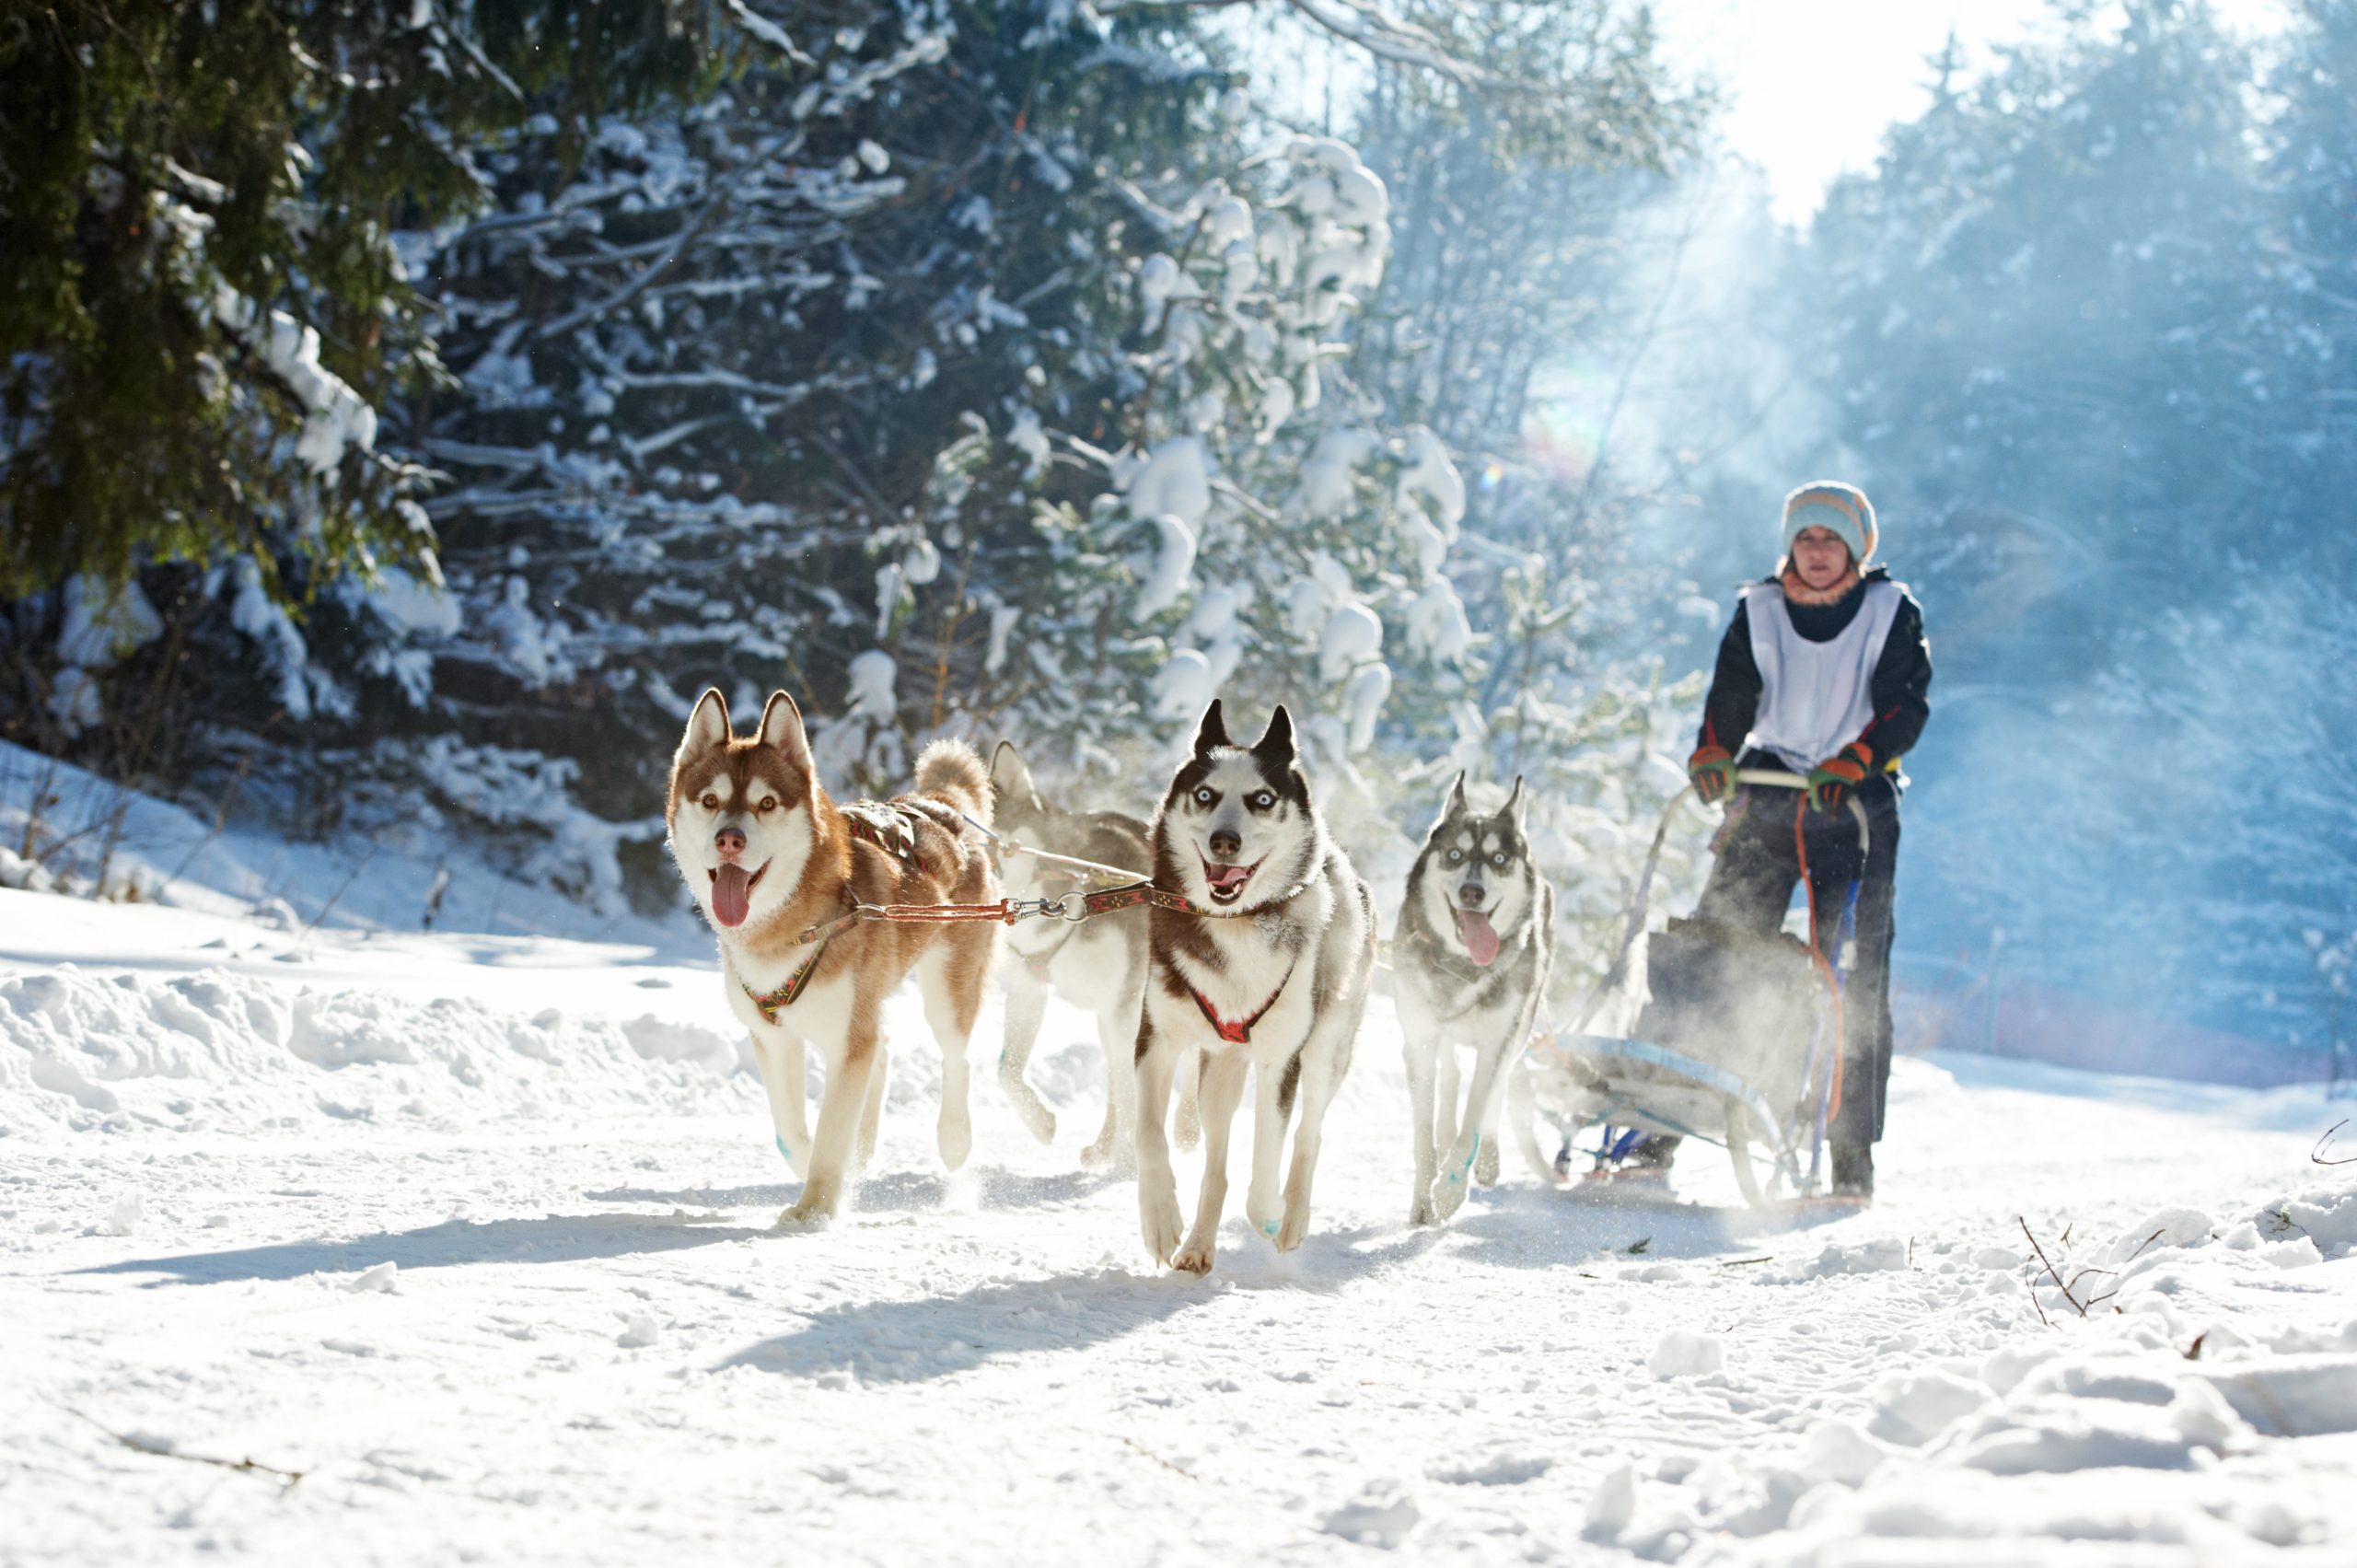 Sled dog racing. musher dogteam driver and Siberian husky at snow winter competition race in forest